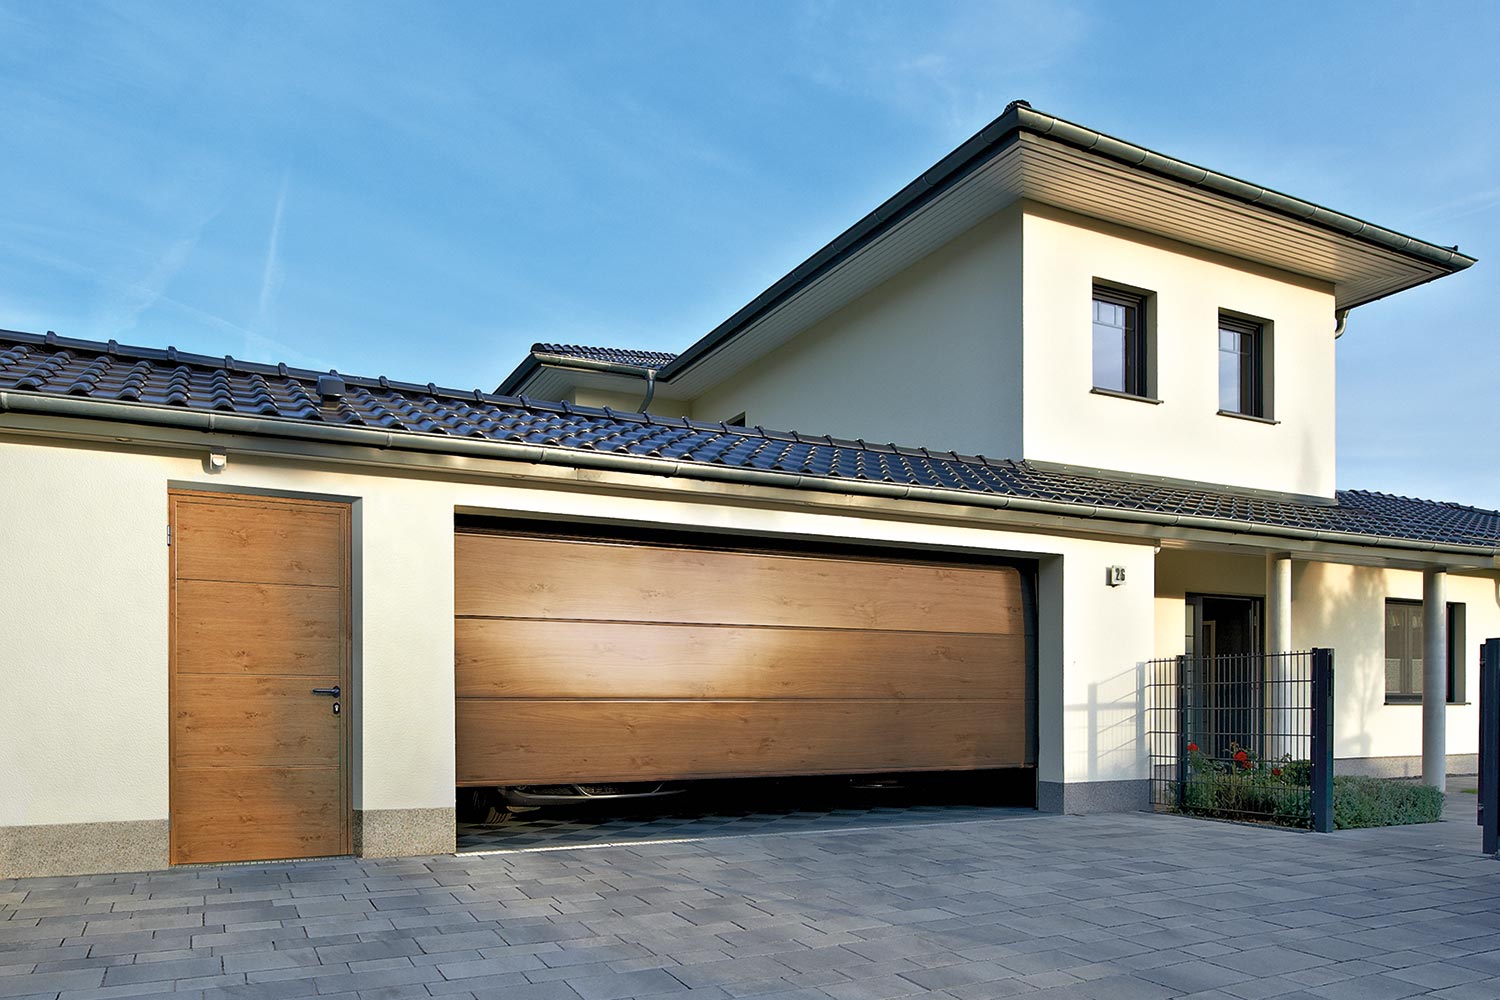 Service Specialists for garage doors, gates, automatic openers and remotes - Gallery 13